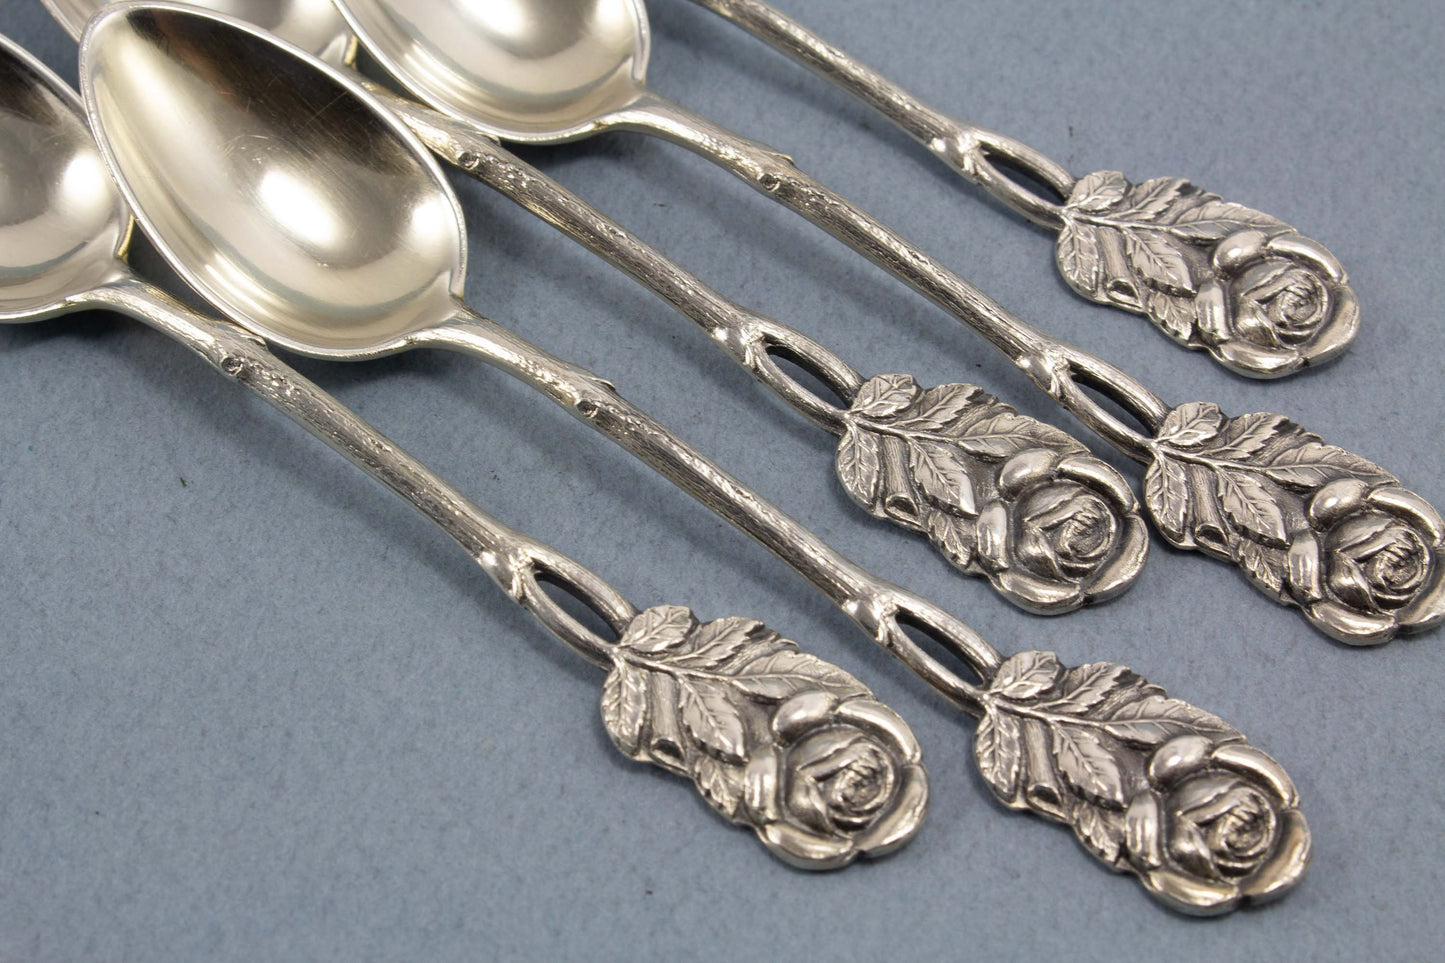 5 mocha spoons made of 800er silver, espresso spoon with roses, Wilkens 